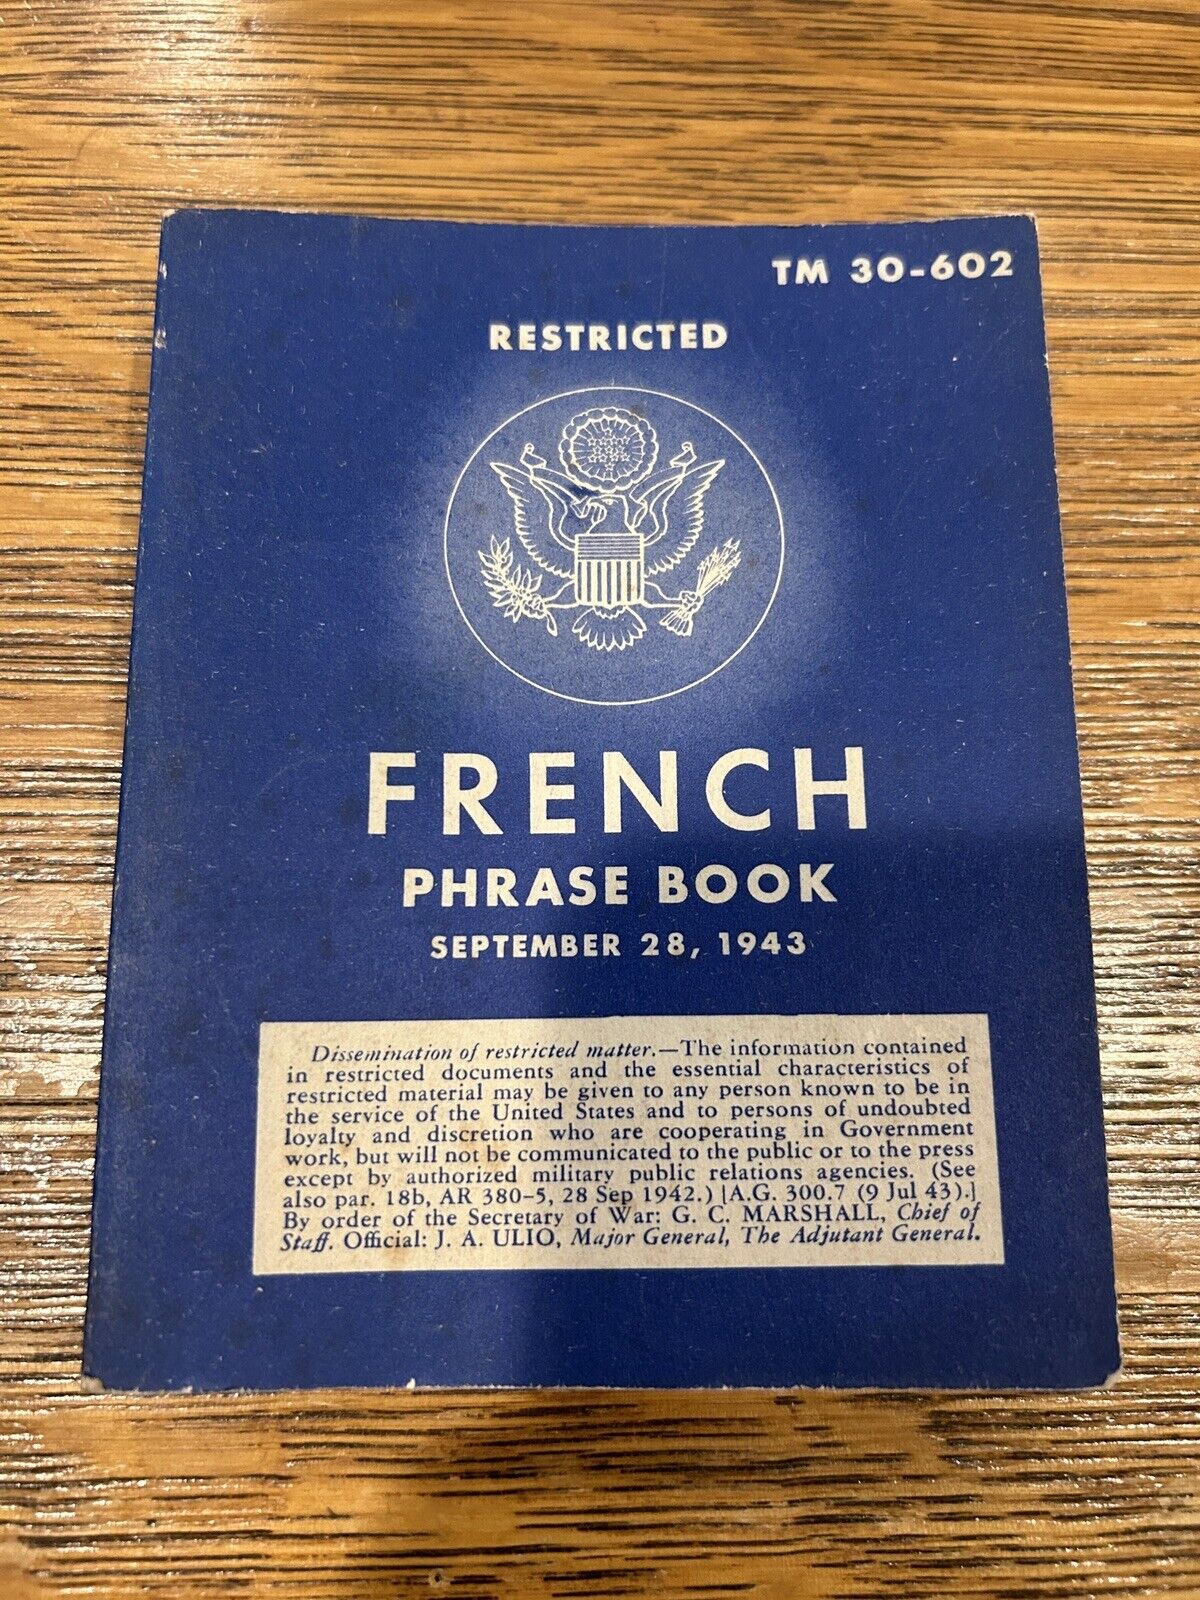 WWII French Phrase Book Restricted TM 30-602 War Department 1943 US Military WW2